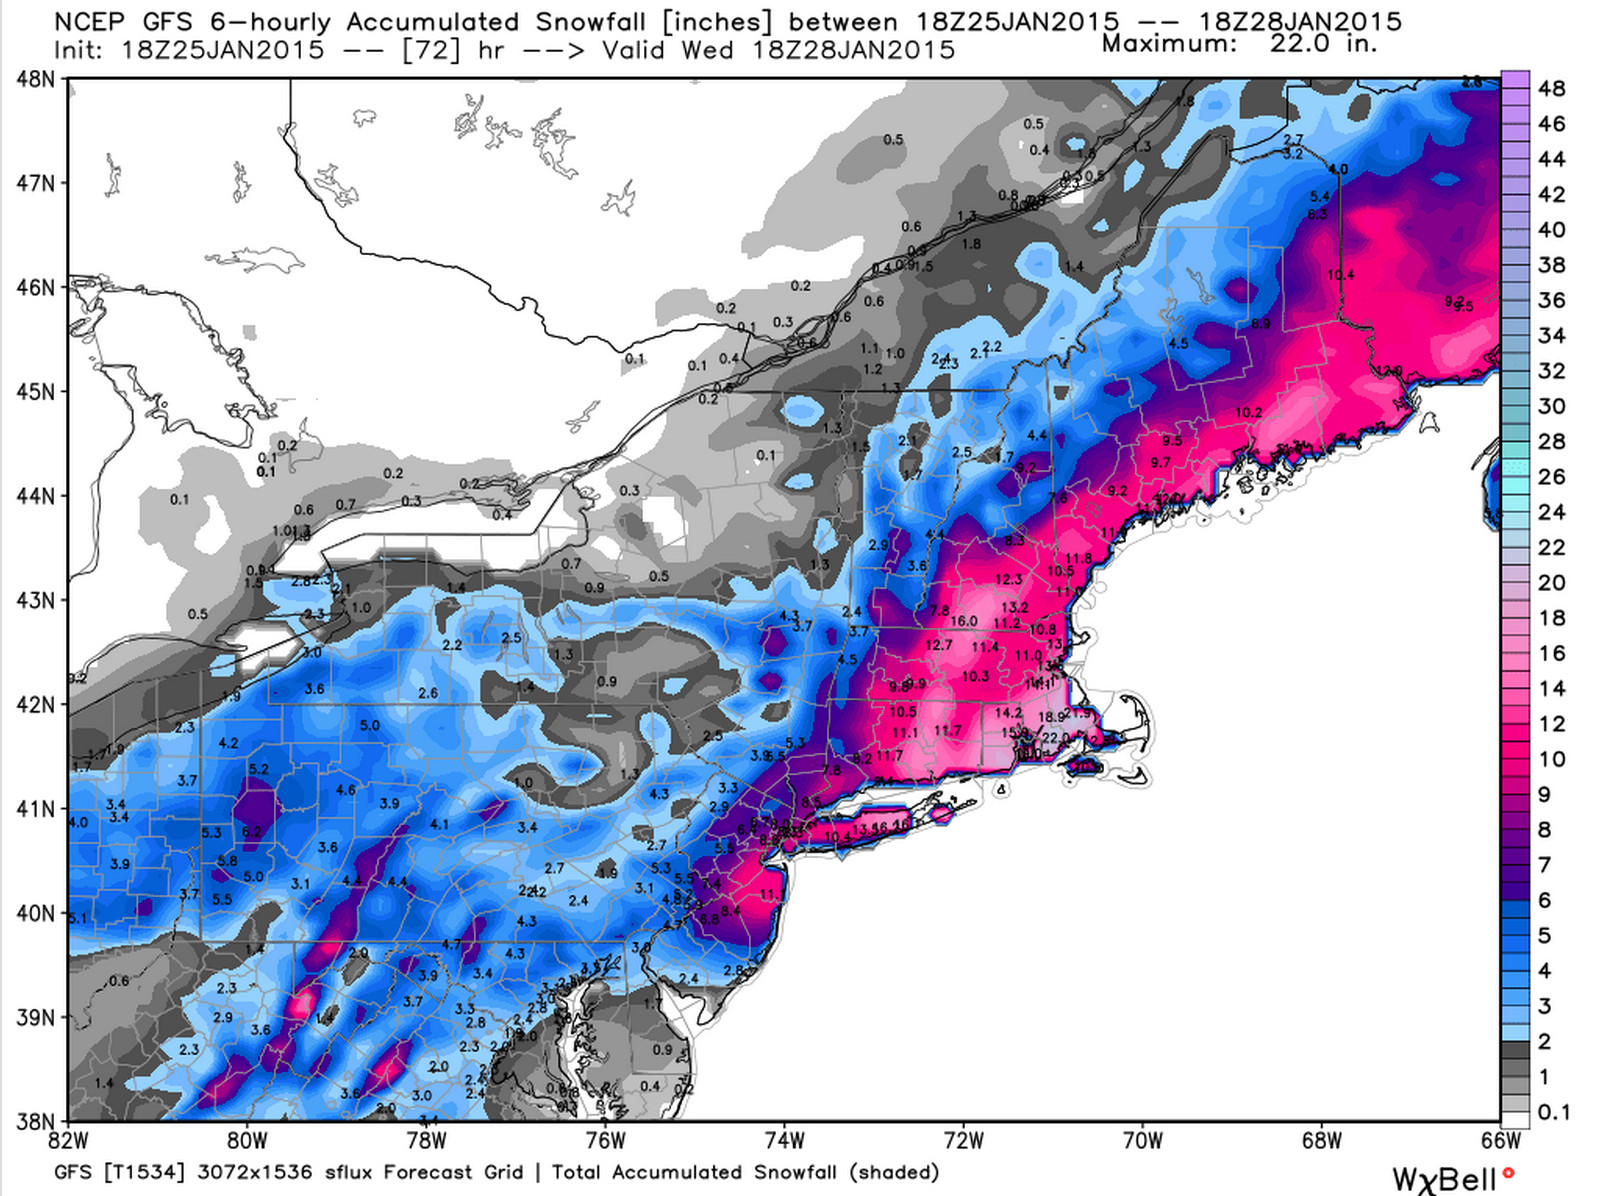 GFS snowfall forecast, much lower for NYC than current NWS forecast | WeatherBell Analytics